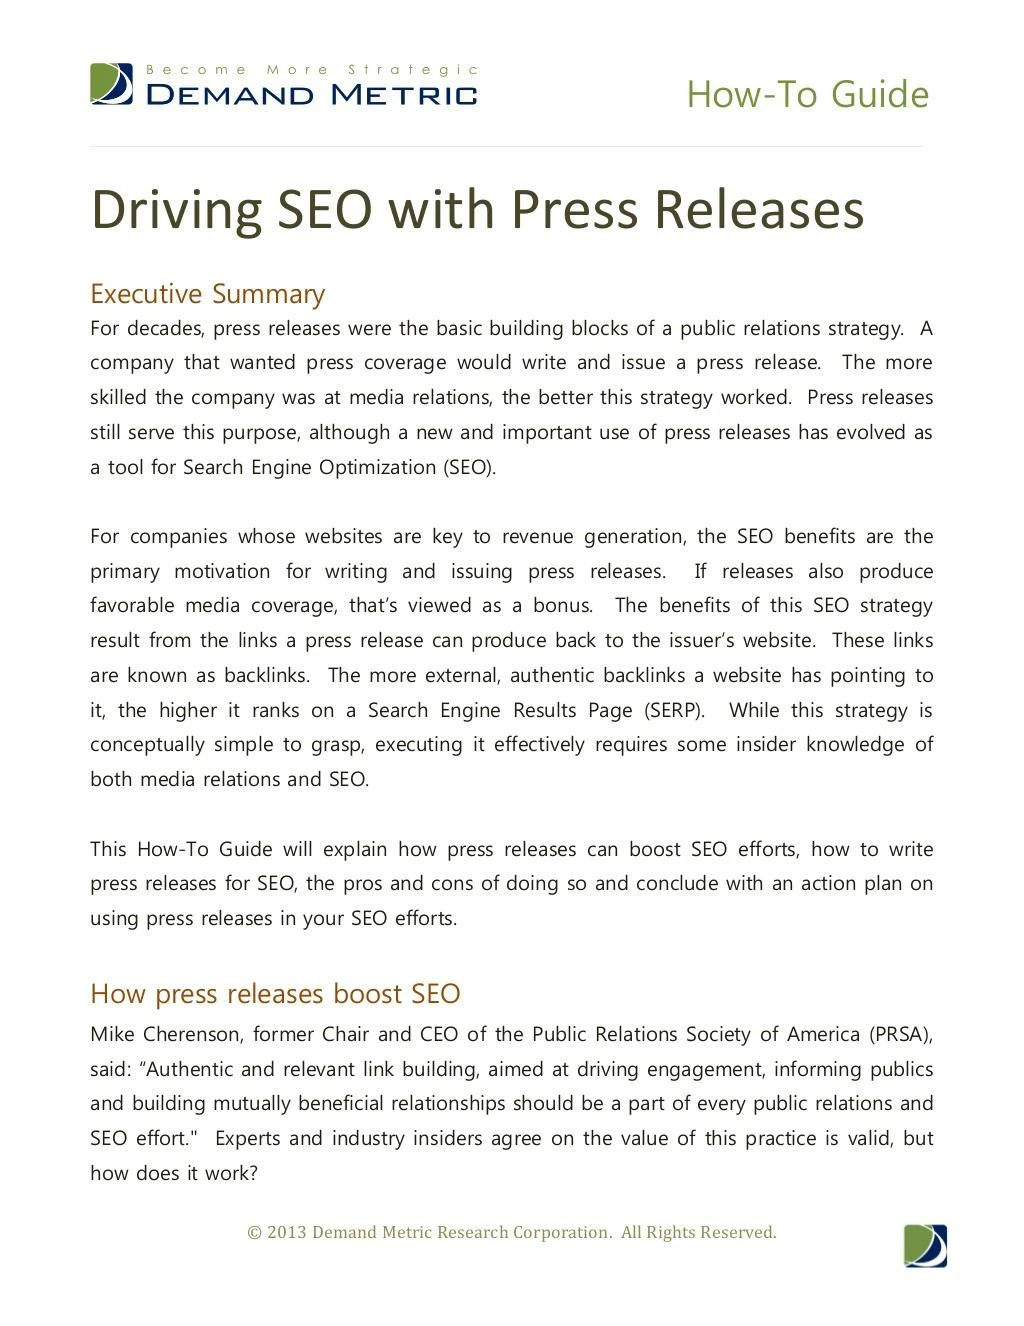 how to guide driving seo with press releases